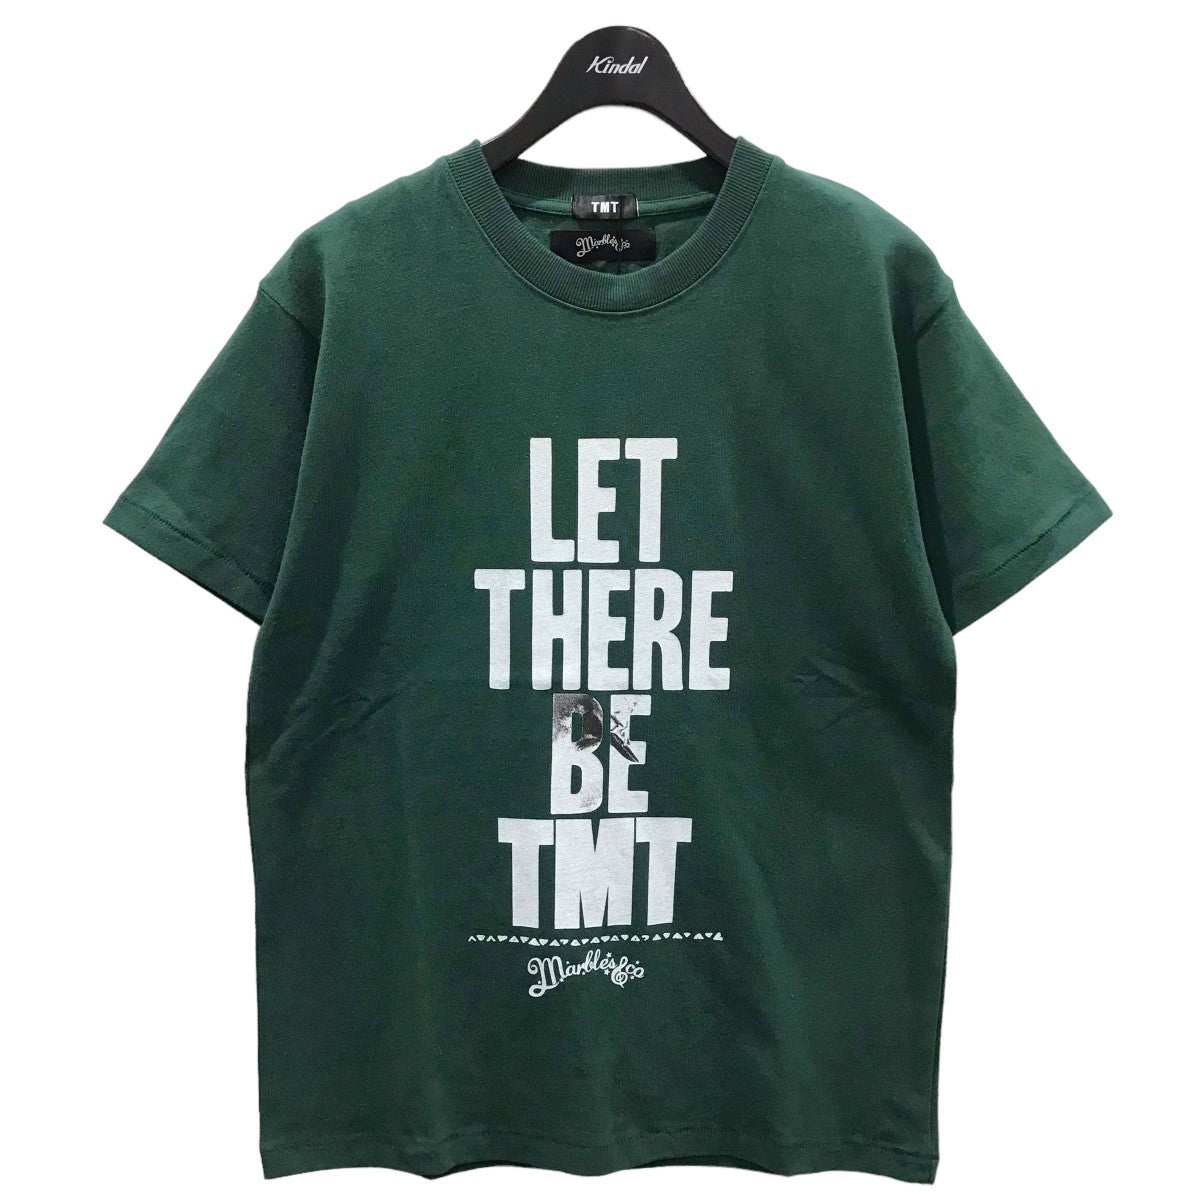 TMT(ティーエムティー) × Marbles プリントTシャツ S／S T-SHIRTS LET ...